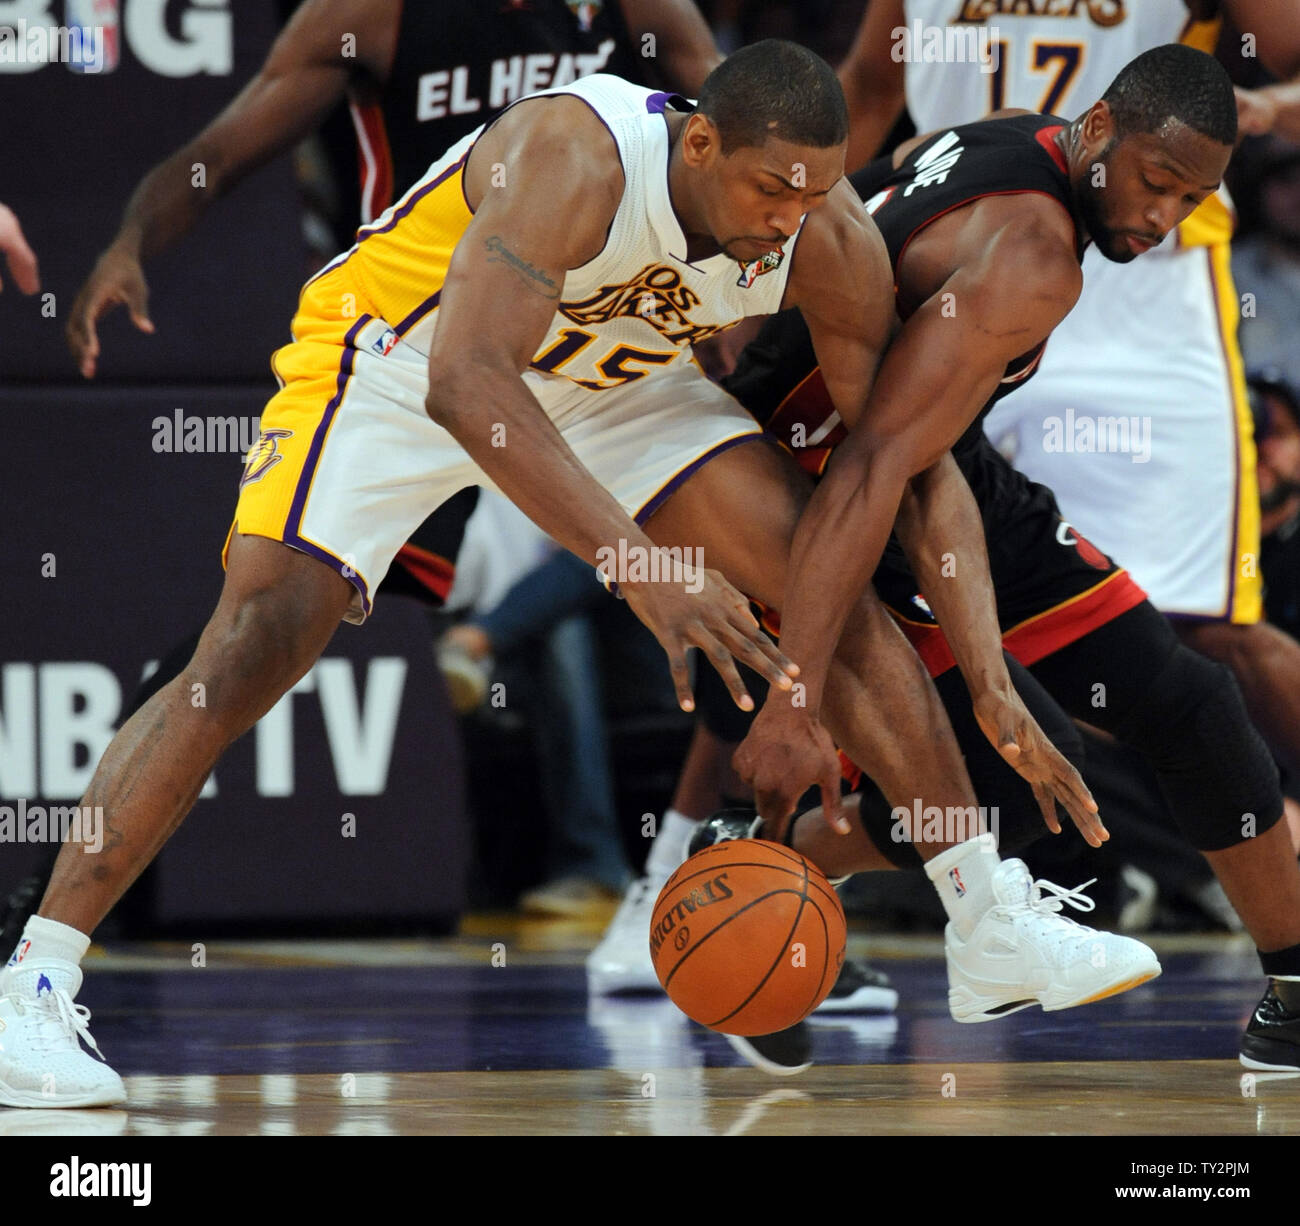 Los Angeles Lakers small forward Metta World Peace (15) and Miami Heat shooting guard Dwyane Wade (3) battle for the ball in the second half of  their NBA basketball game in Los Angeles on March 4, 2012.  The Lakers won 93 to 83.  UPI/Lori Shepler Stock Photo